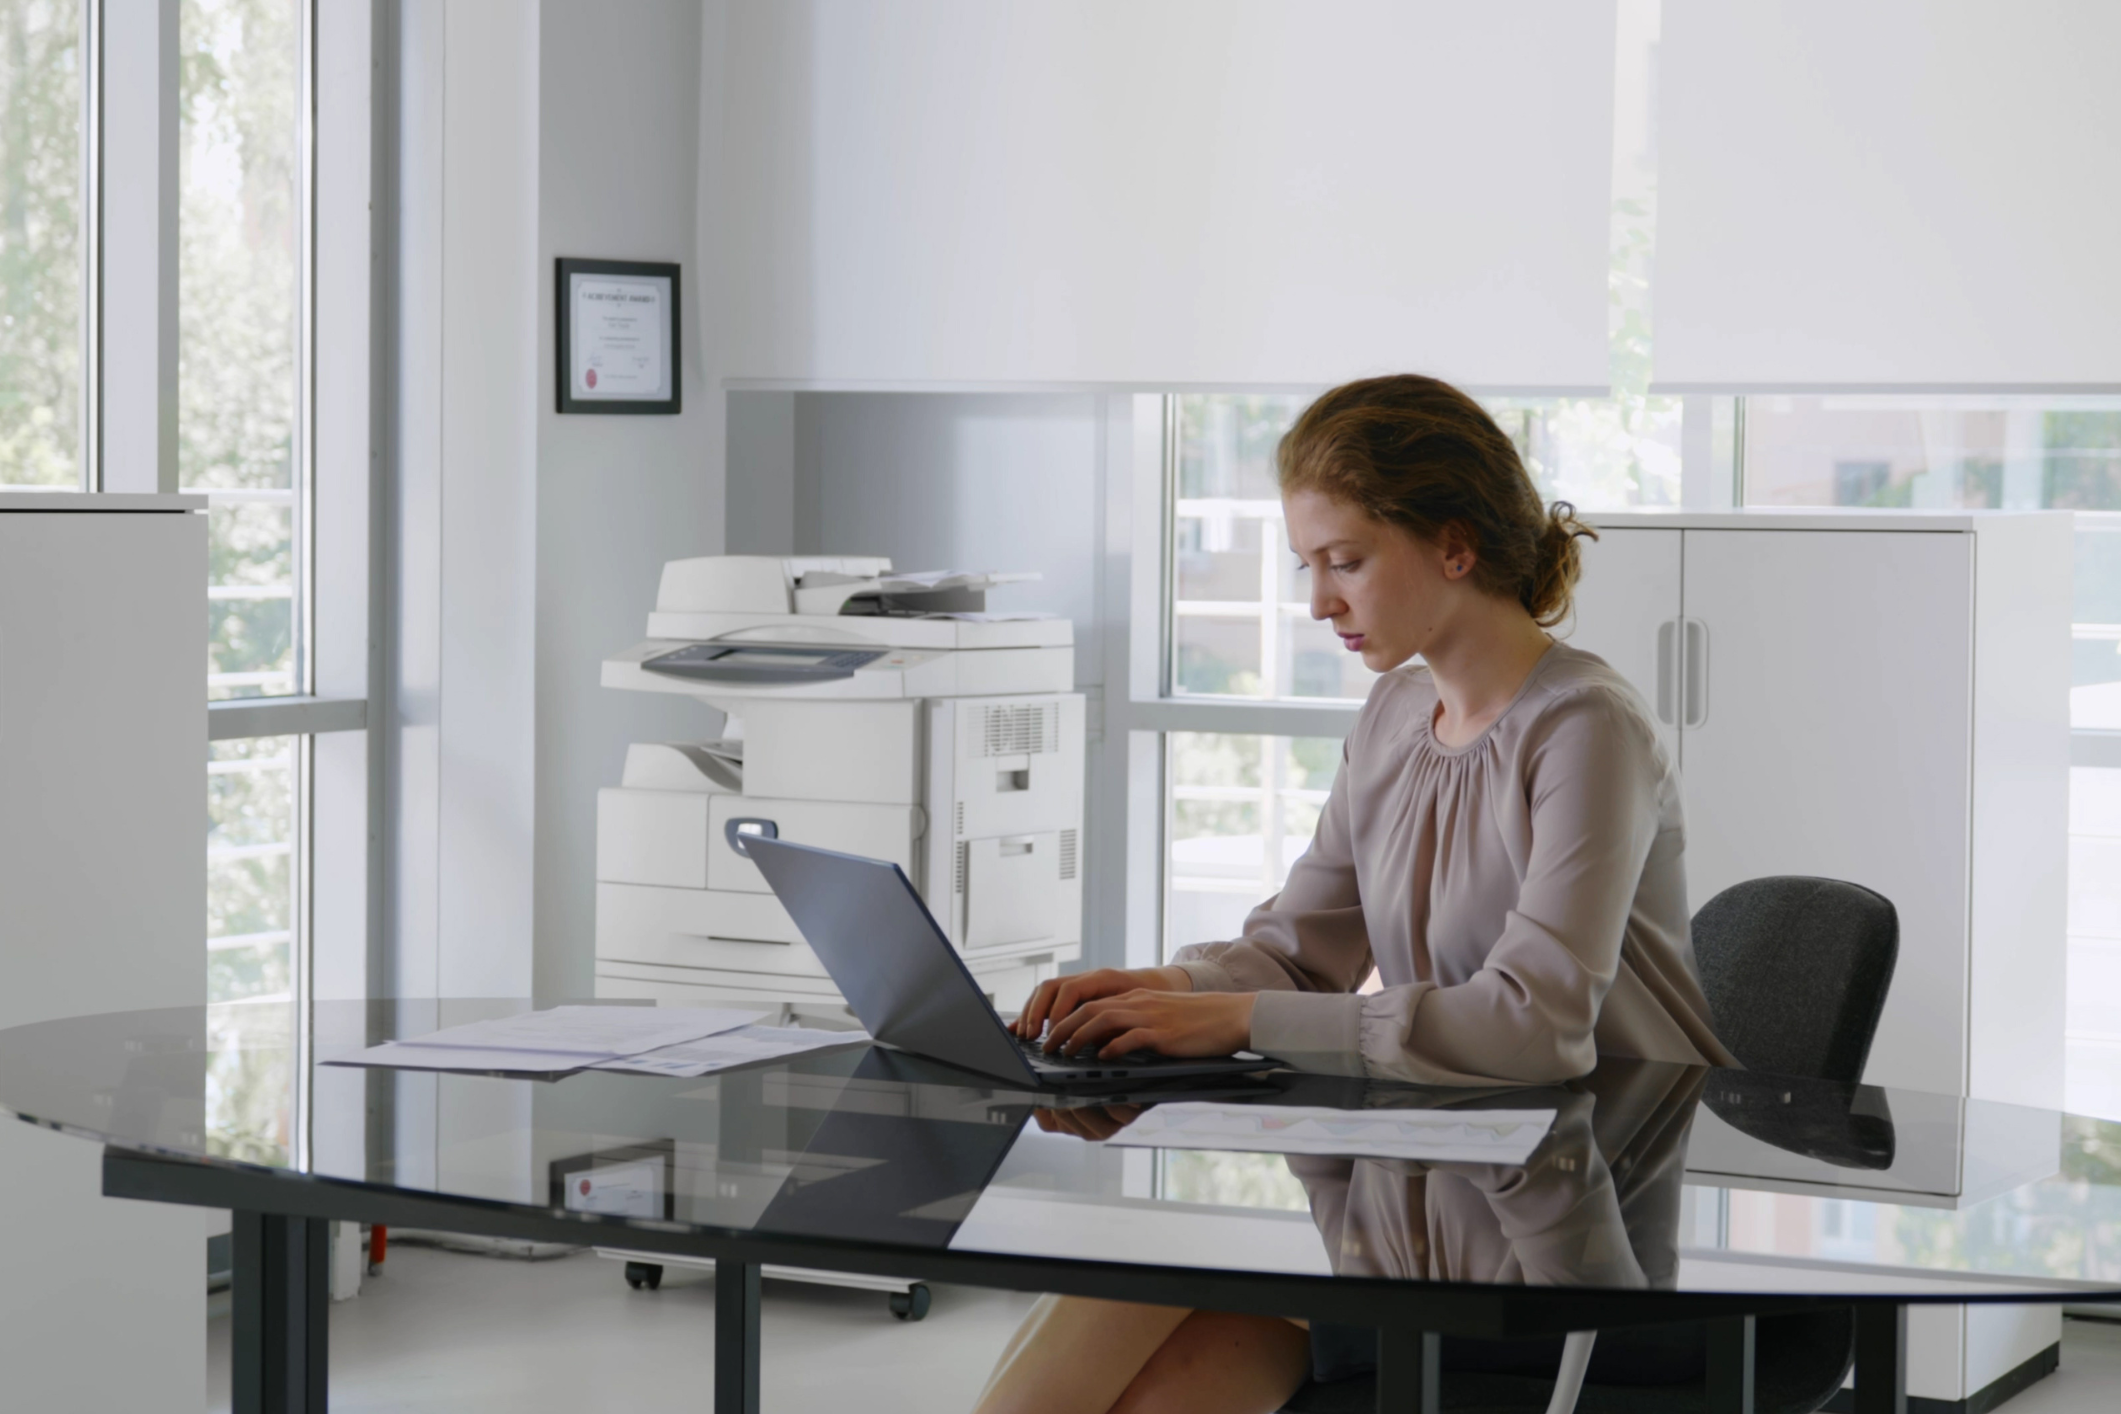 A businesswoman sits at a desk in a clean, bright, modern office with an office copier in the background.